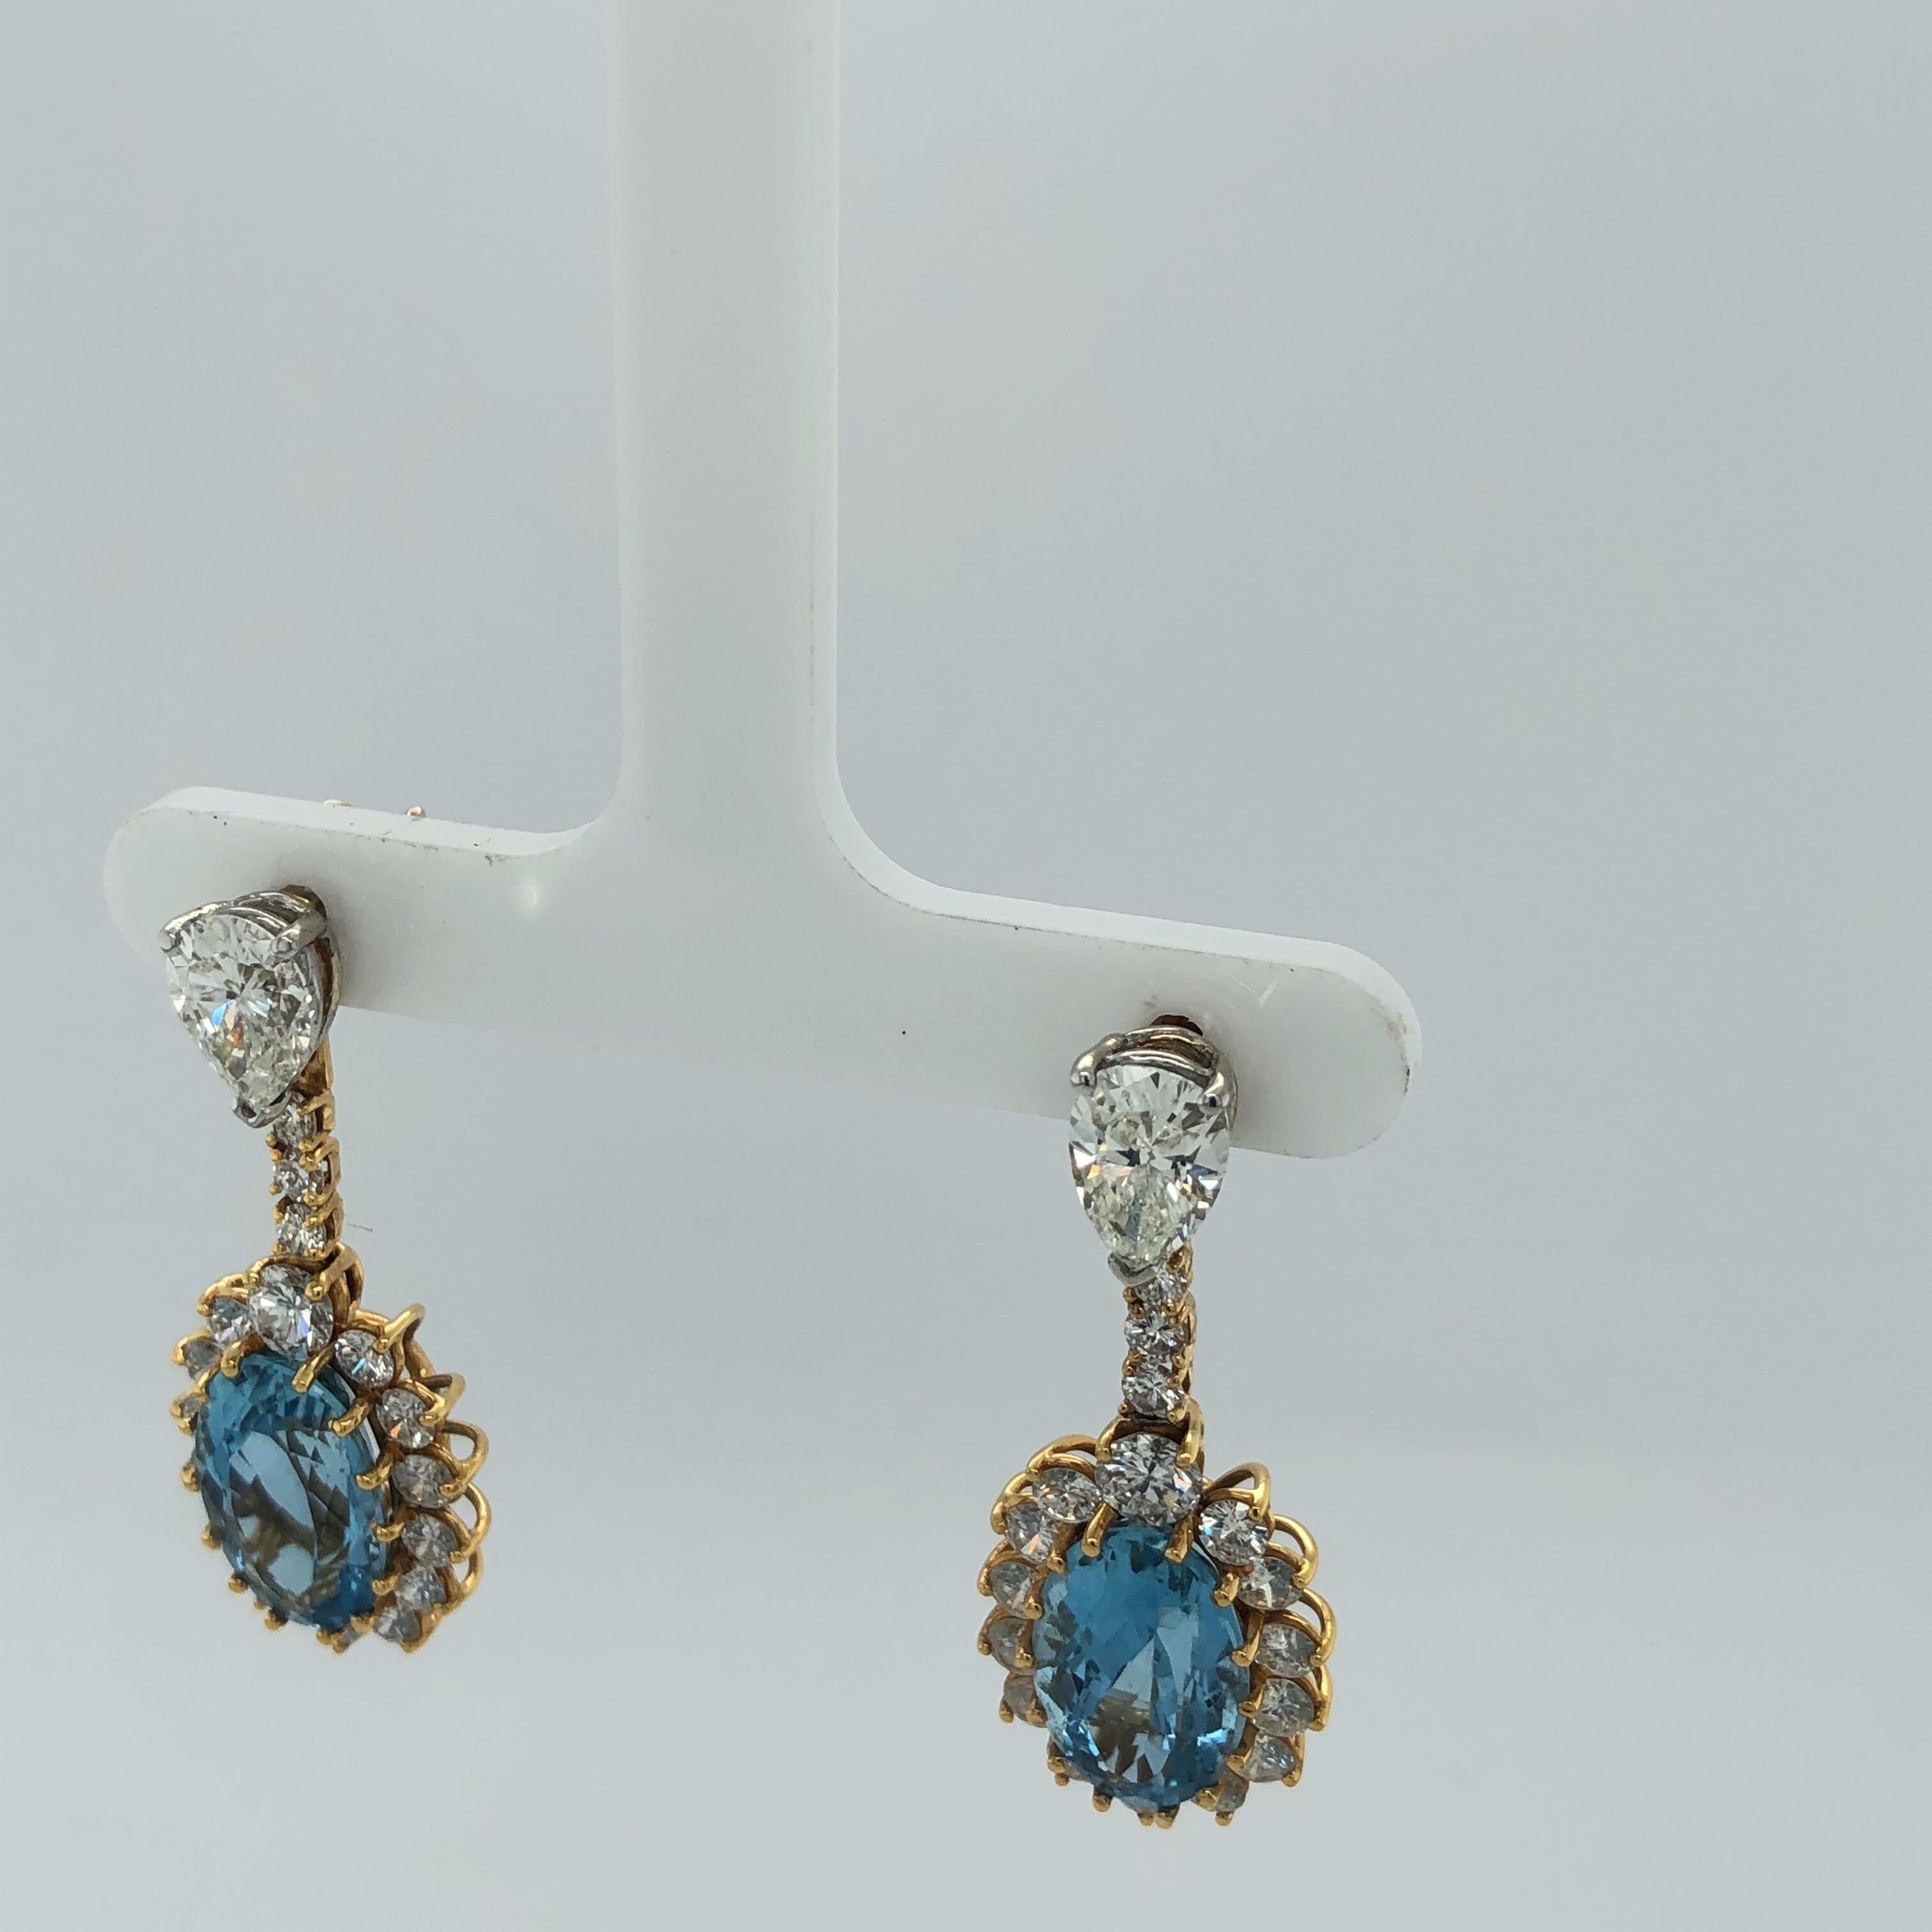 One pair of lady's 14K Yellow Gold Diamond and Aquamarine Earrings containing 2 Pear shape diamonds with 2.40 carats total weight. Drops Contain 10 full cut diamonds .81 carat total weight with 2 oval Aquamarine stones 8.8 carats total weight and 26